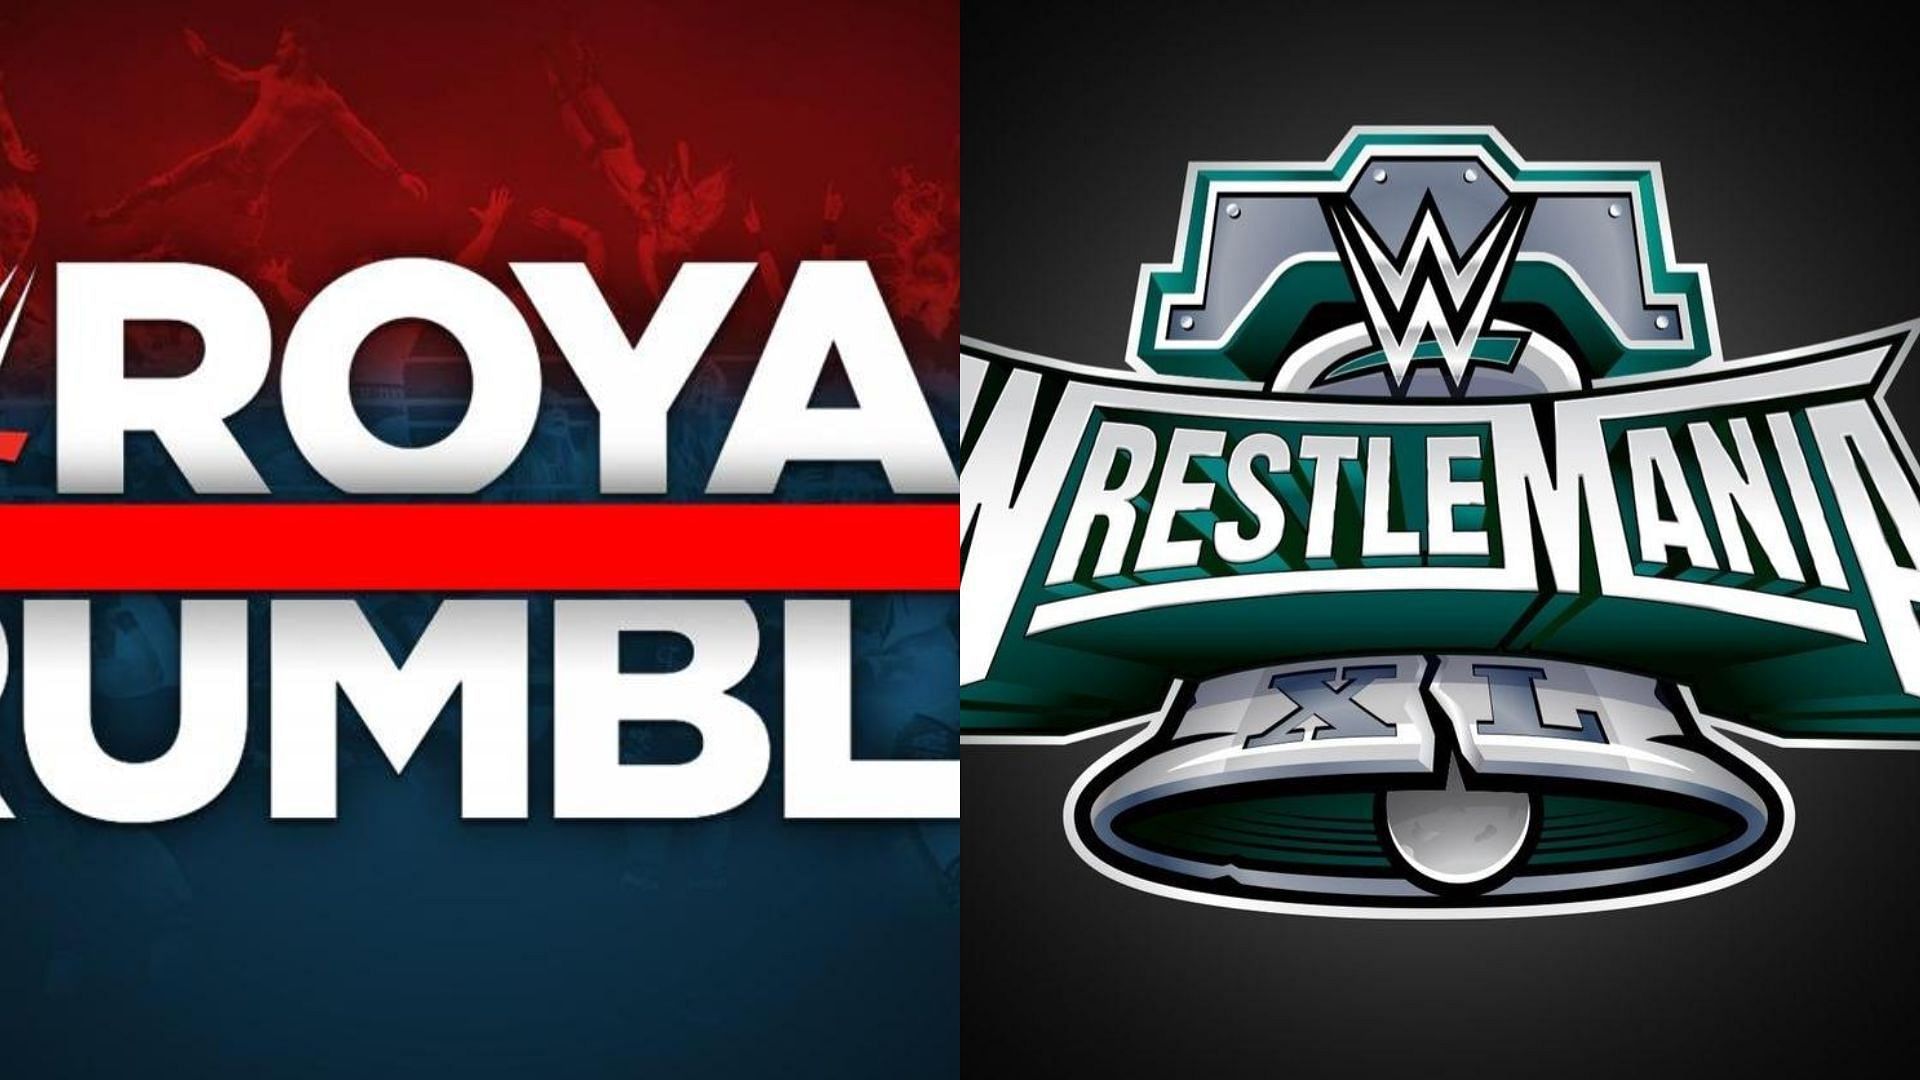 WWE has shortlisted potential Royal Rumble winners who will challenge for the title at Wrestlemania